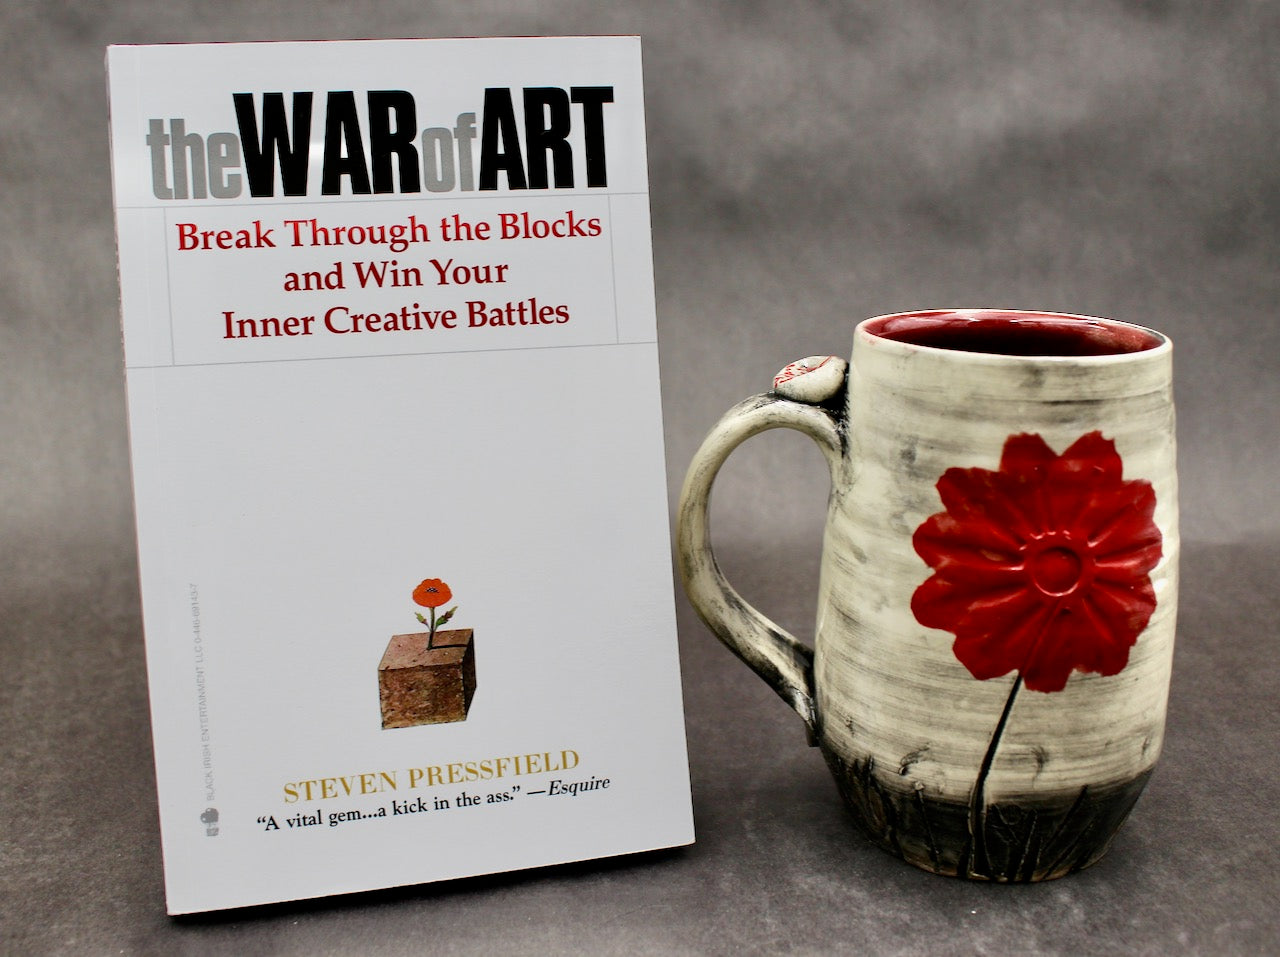 One Bullet Flower Mug and Autographed Book, "The War of Art" by Steven Pressfield (SK7799)